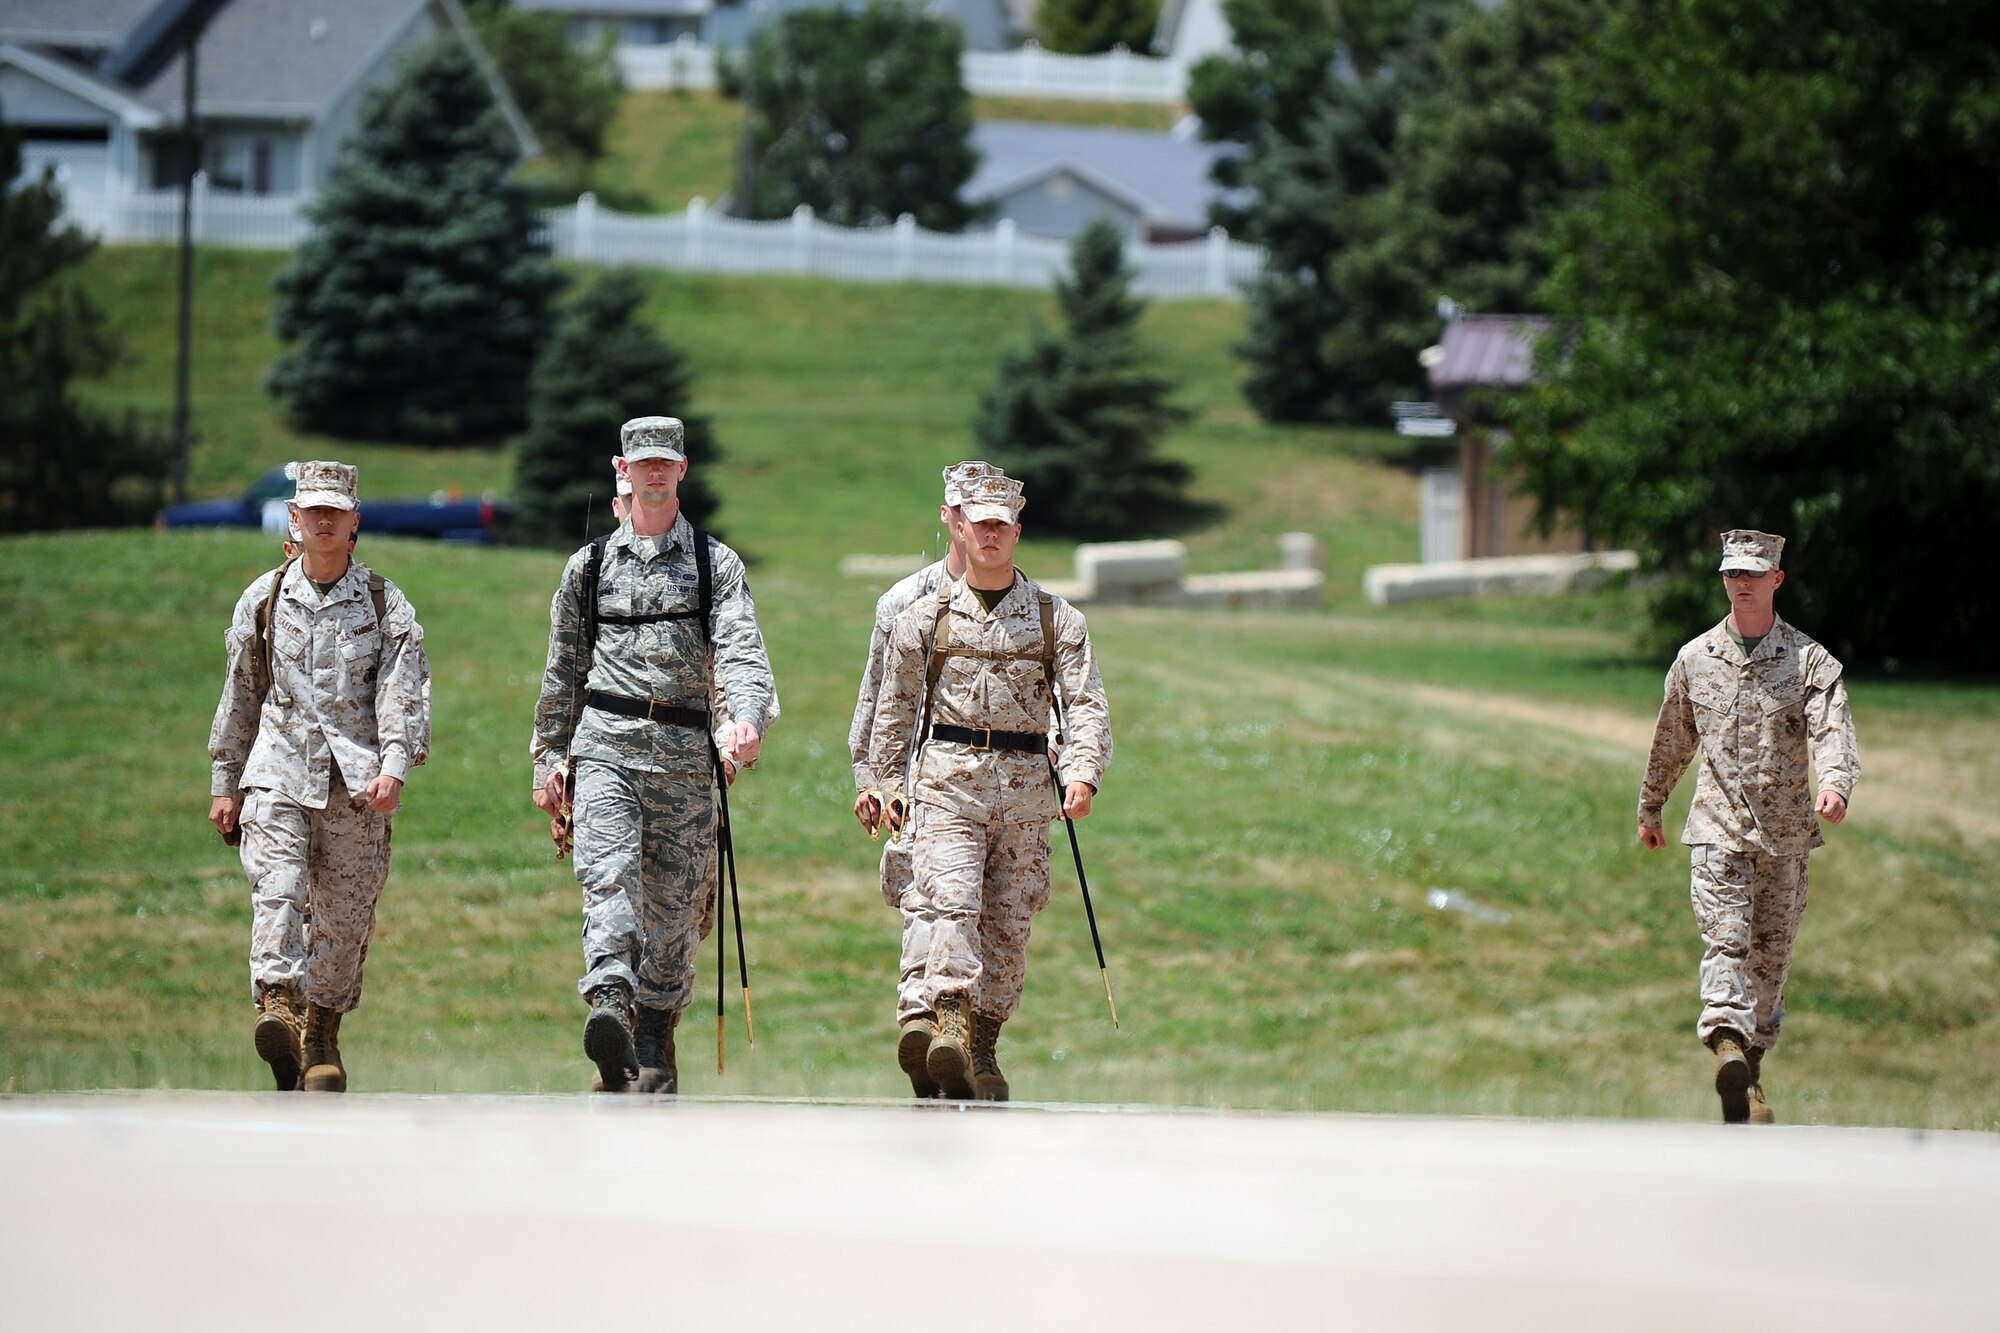 Attendees of the U.S. Marine Corps Corporals Leadership Course march in formation as they work on the Keeper of Tradition portion of training at Offutt Air Force Base, Neb., July 17. Marines from across the U.S. and several Airmen stationed at Offutt took part in the first U.S. Marine Corps Corporals Leadership Course hosted by the 55th Wing July 13-27.  (U.S. Air Force photo by Josh Plueger/Released)